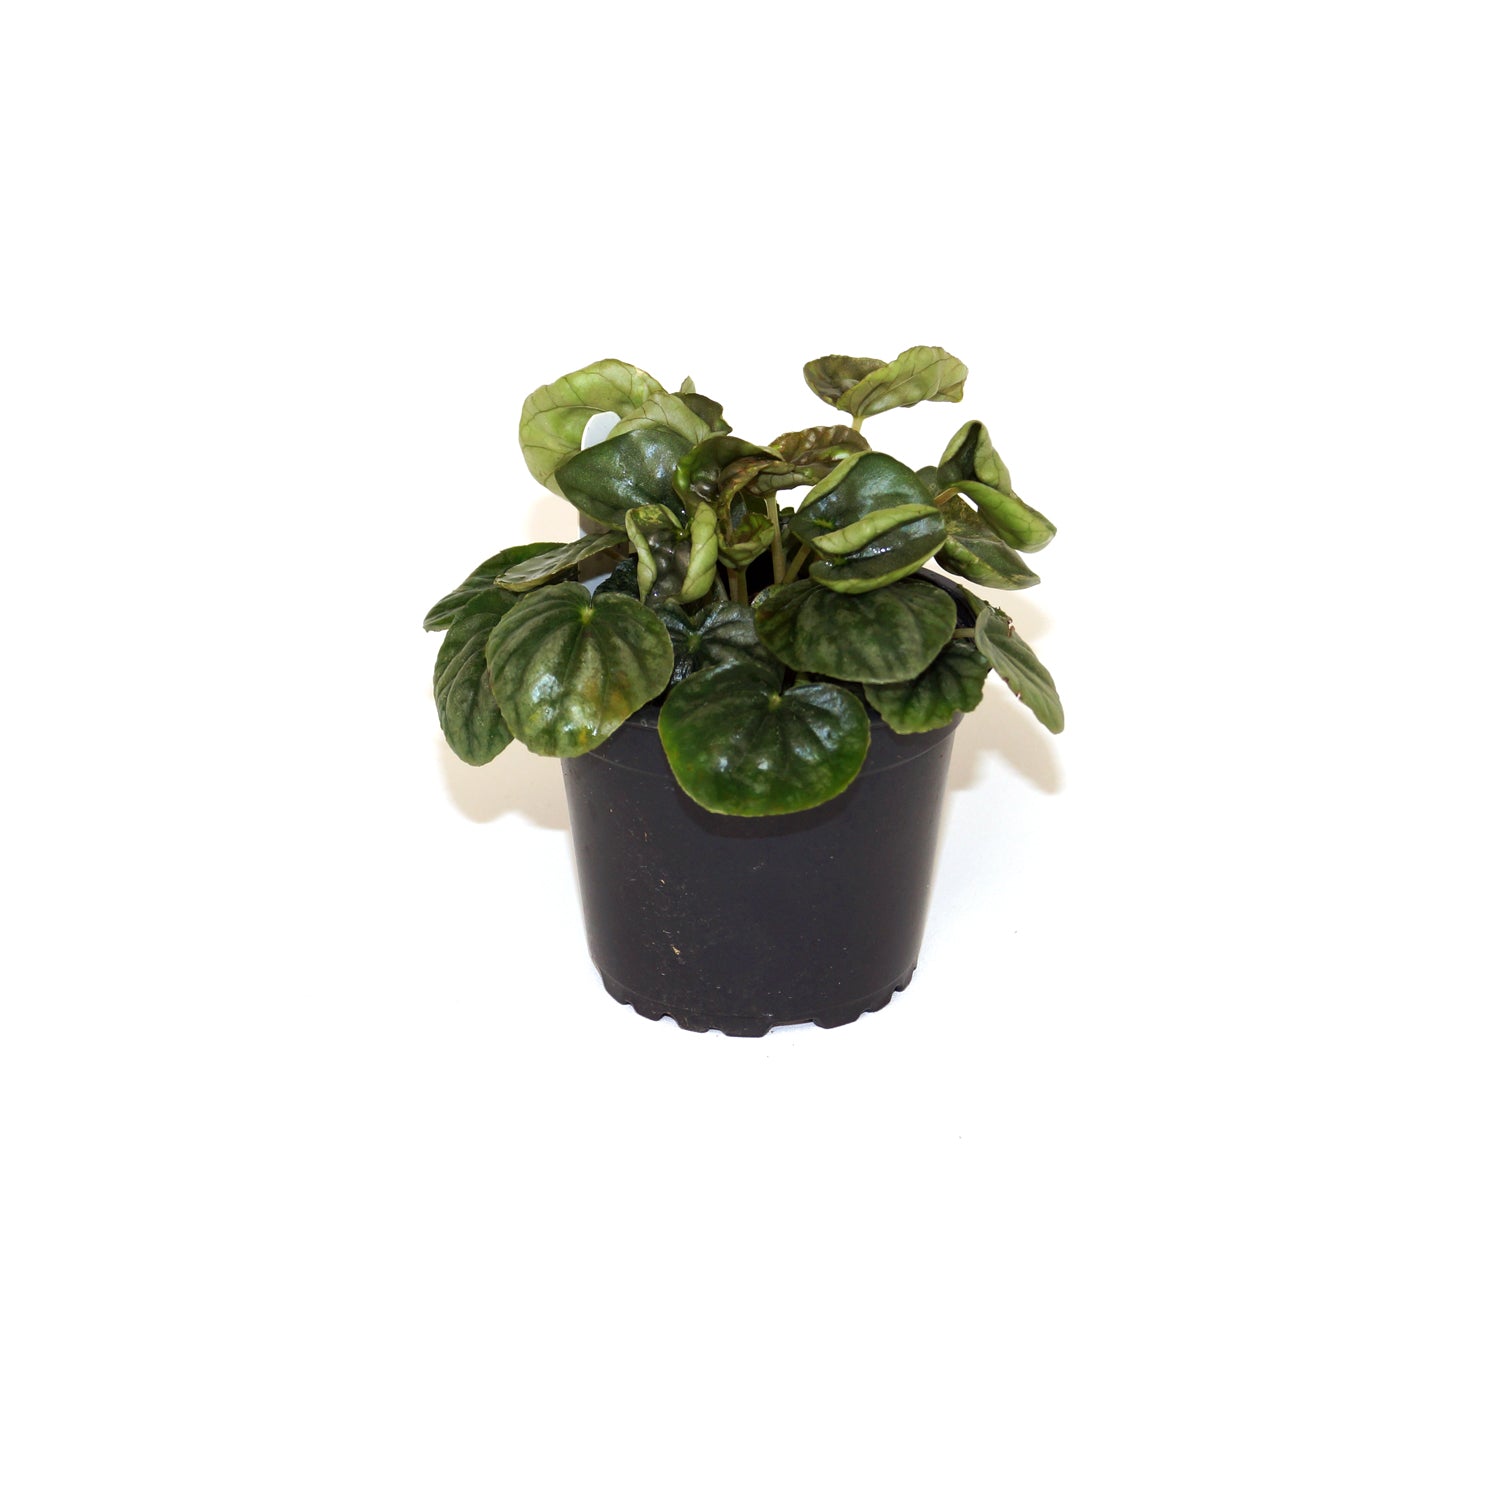 Peperomia caperata 'Steve's Leaves Chameleon' (Limit of 1)